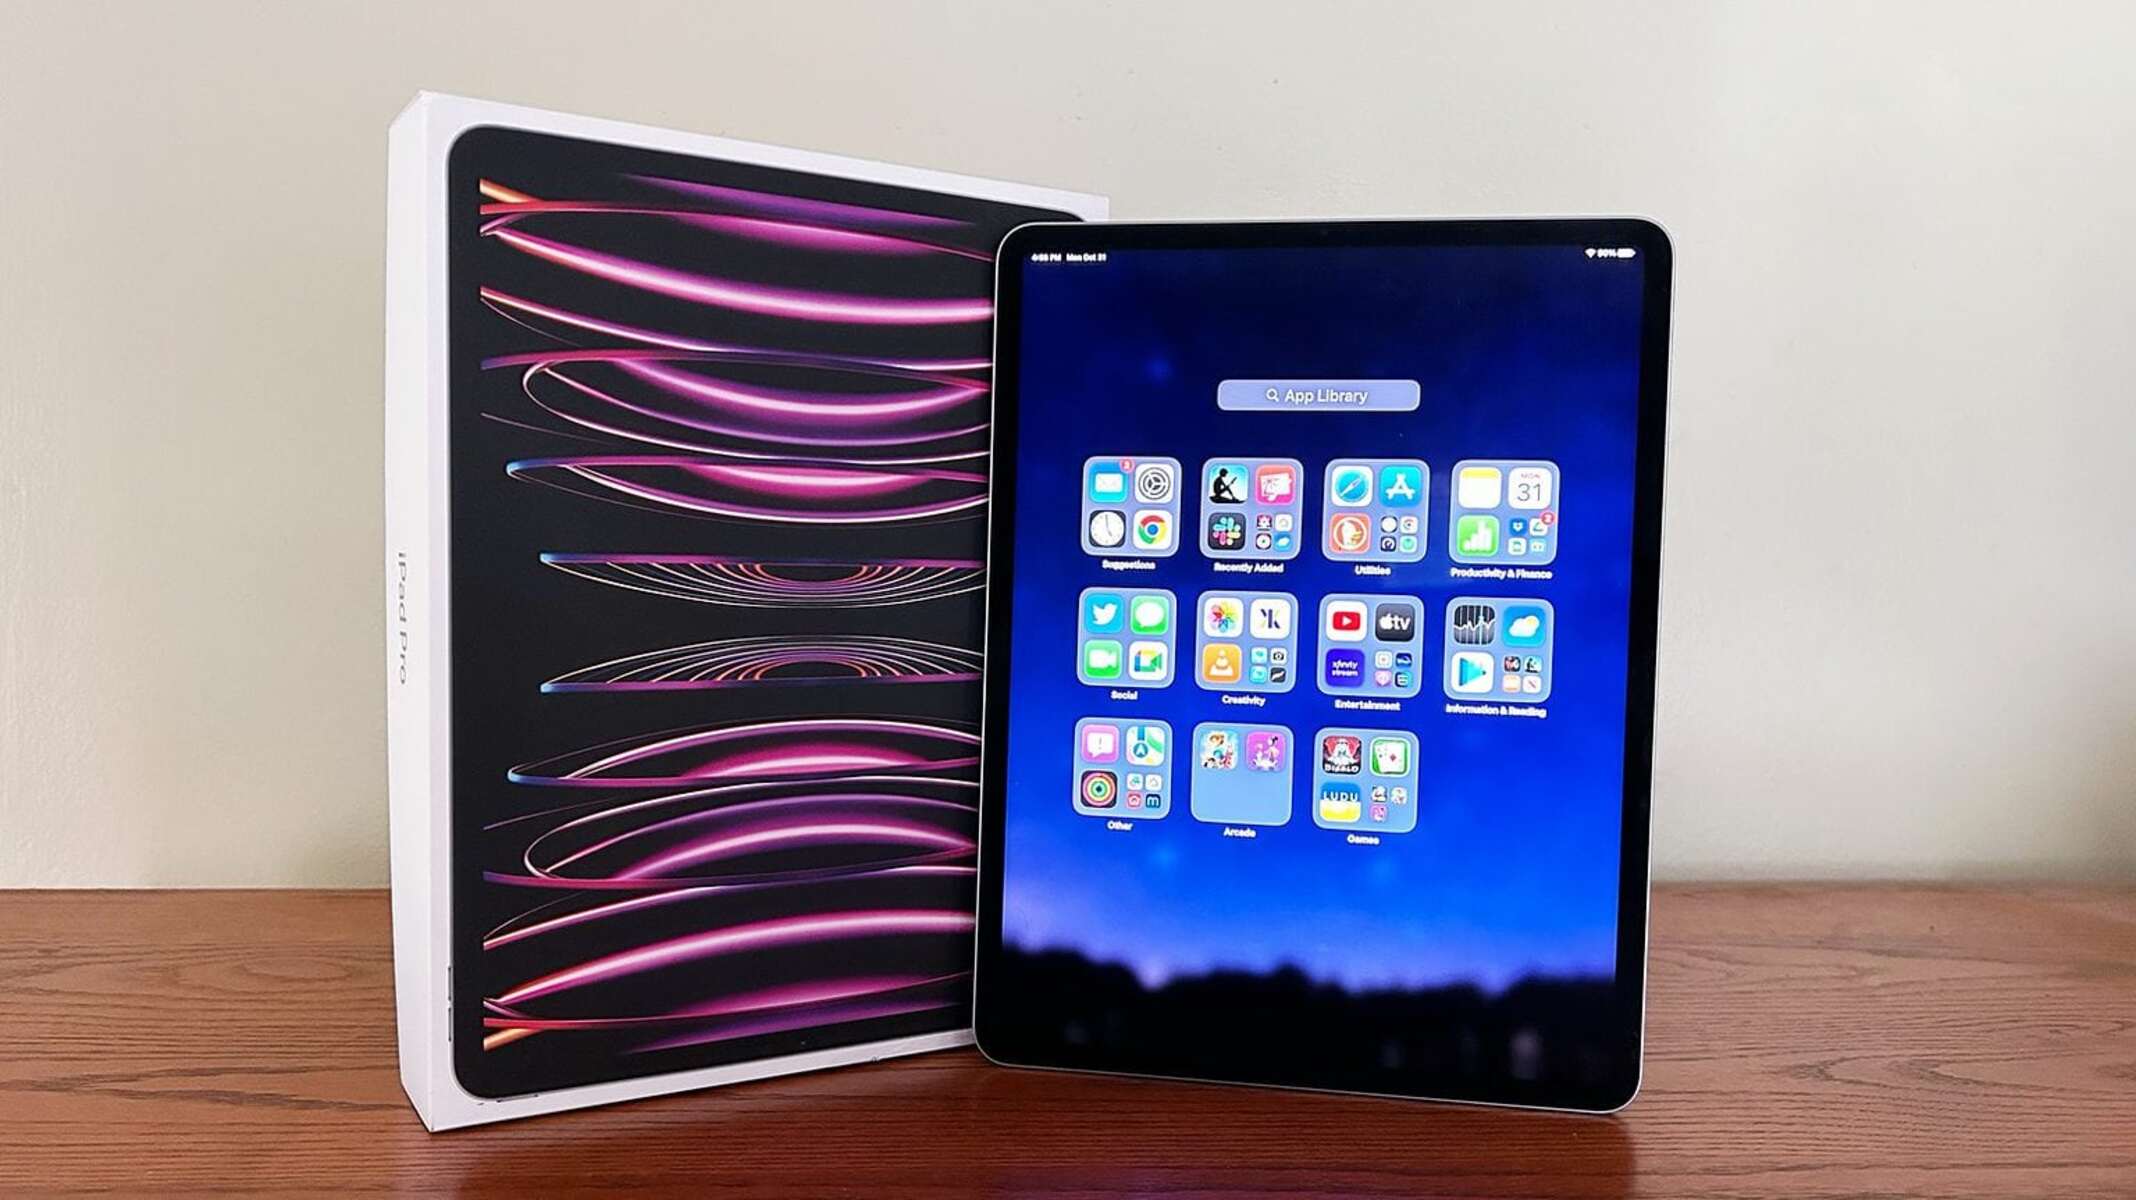 Why Apple Should Ditch The IPad Pro, And Make The Mac Better